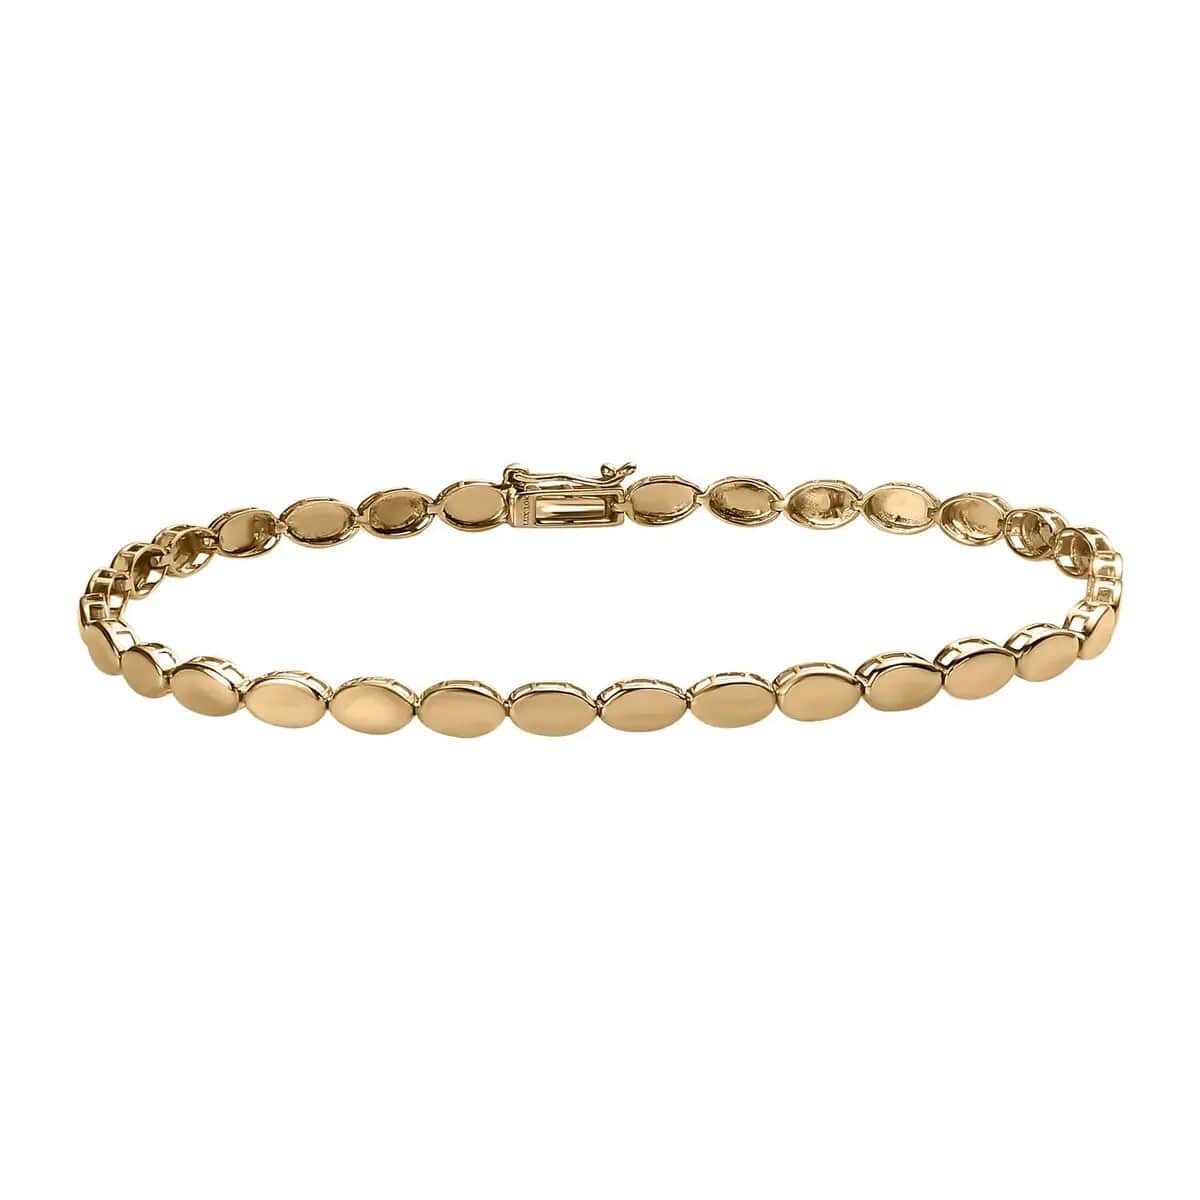 Luxoro 10K Yellow Gold Bracelet,  Oval Link Bracelet, Gold Link Bracelet, Gold Bracelet For Her, Gold Jewelry For Her (7.25 In) 3.8 Grams image number 0